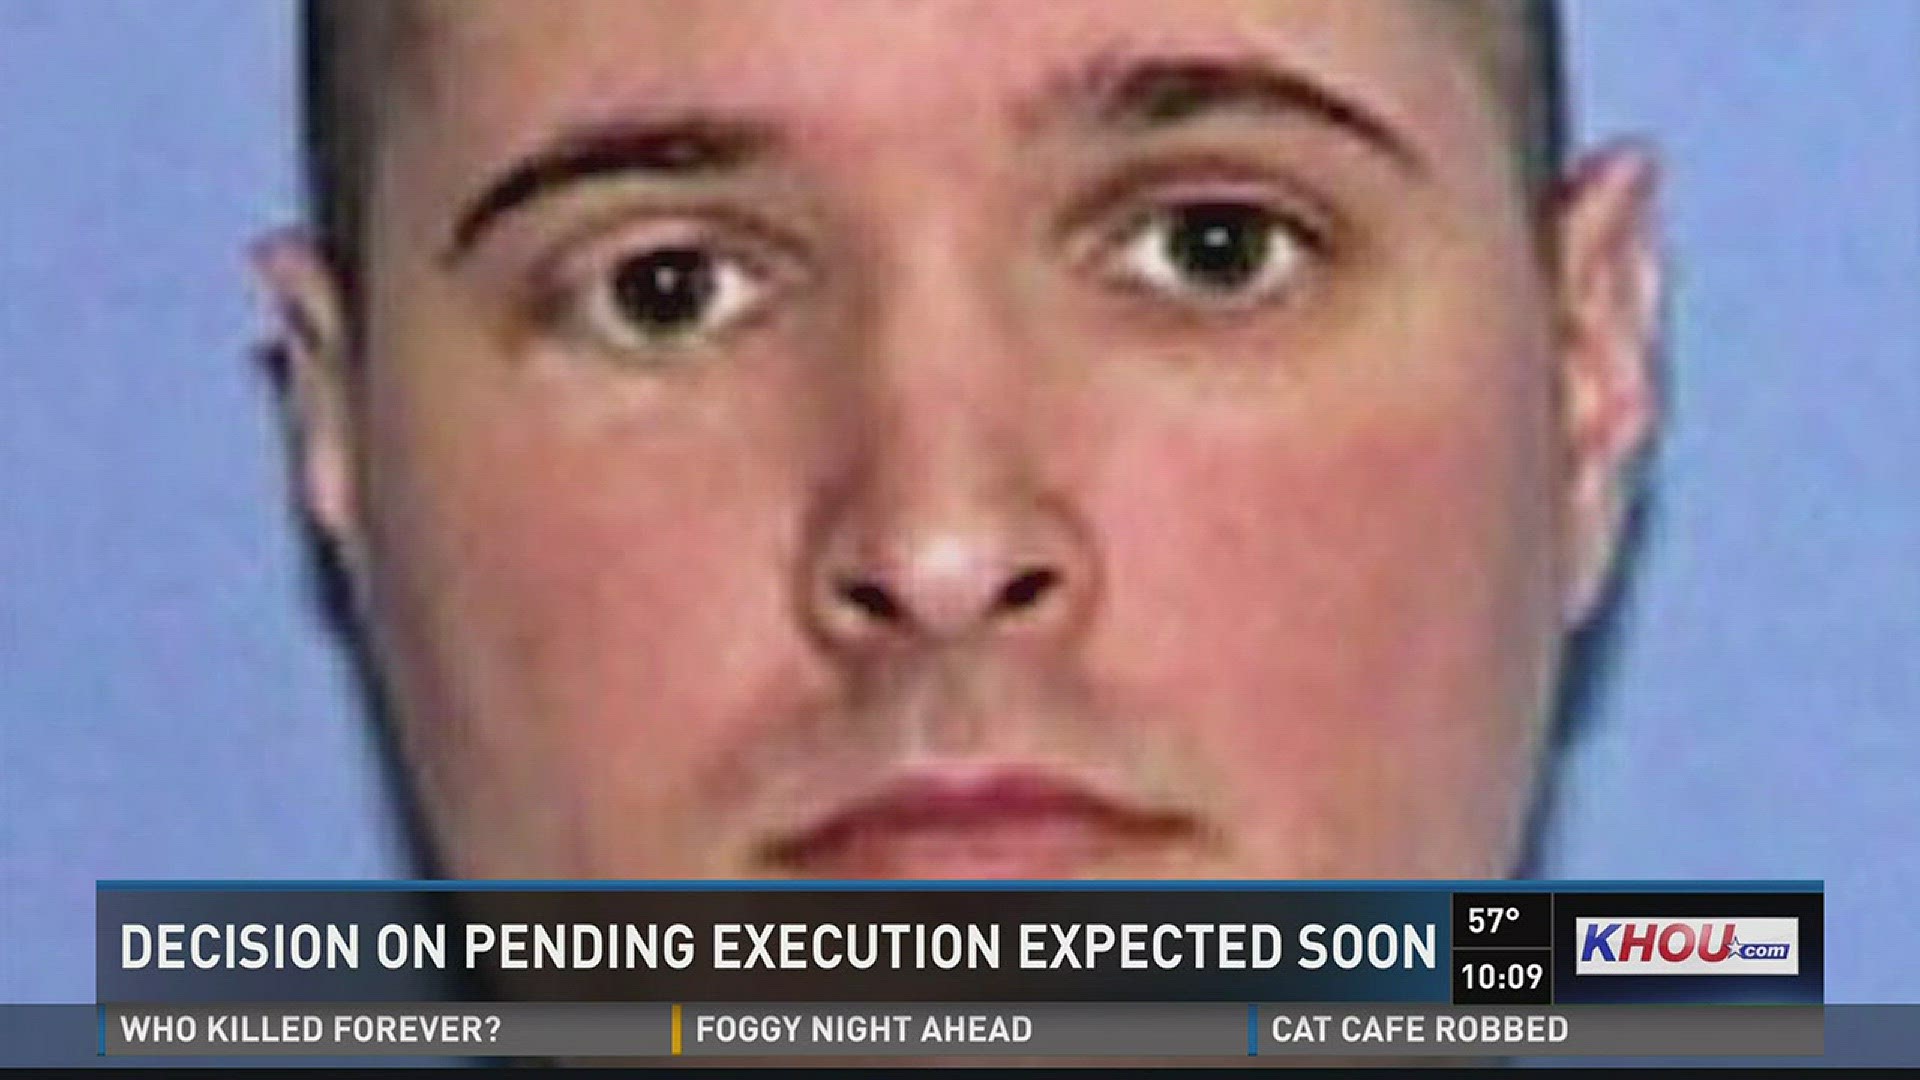 Convicted killer Bart Whitaker of Sugar Land is less than 24 hours away from being executed, a decision on whether or not to call it off from Governor Abbott is expected soon.